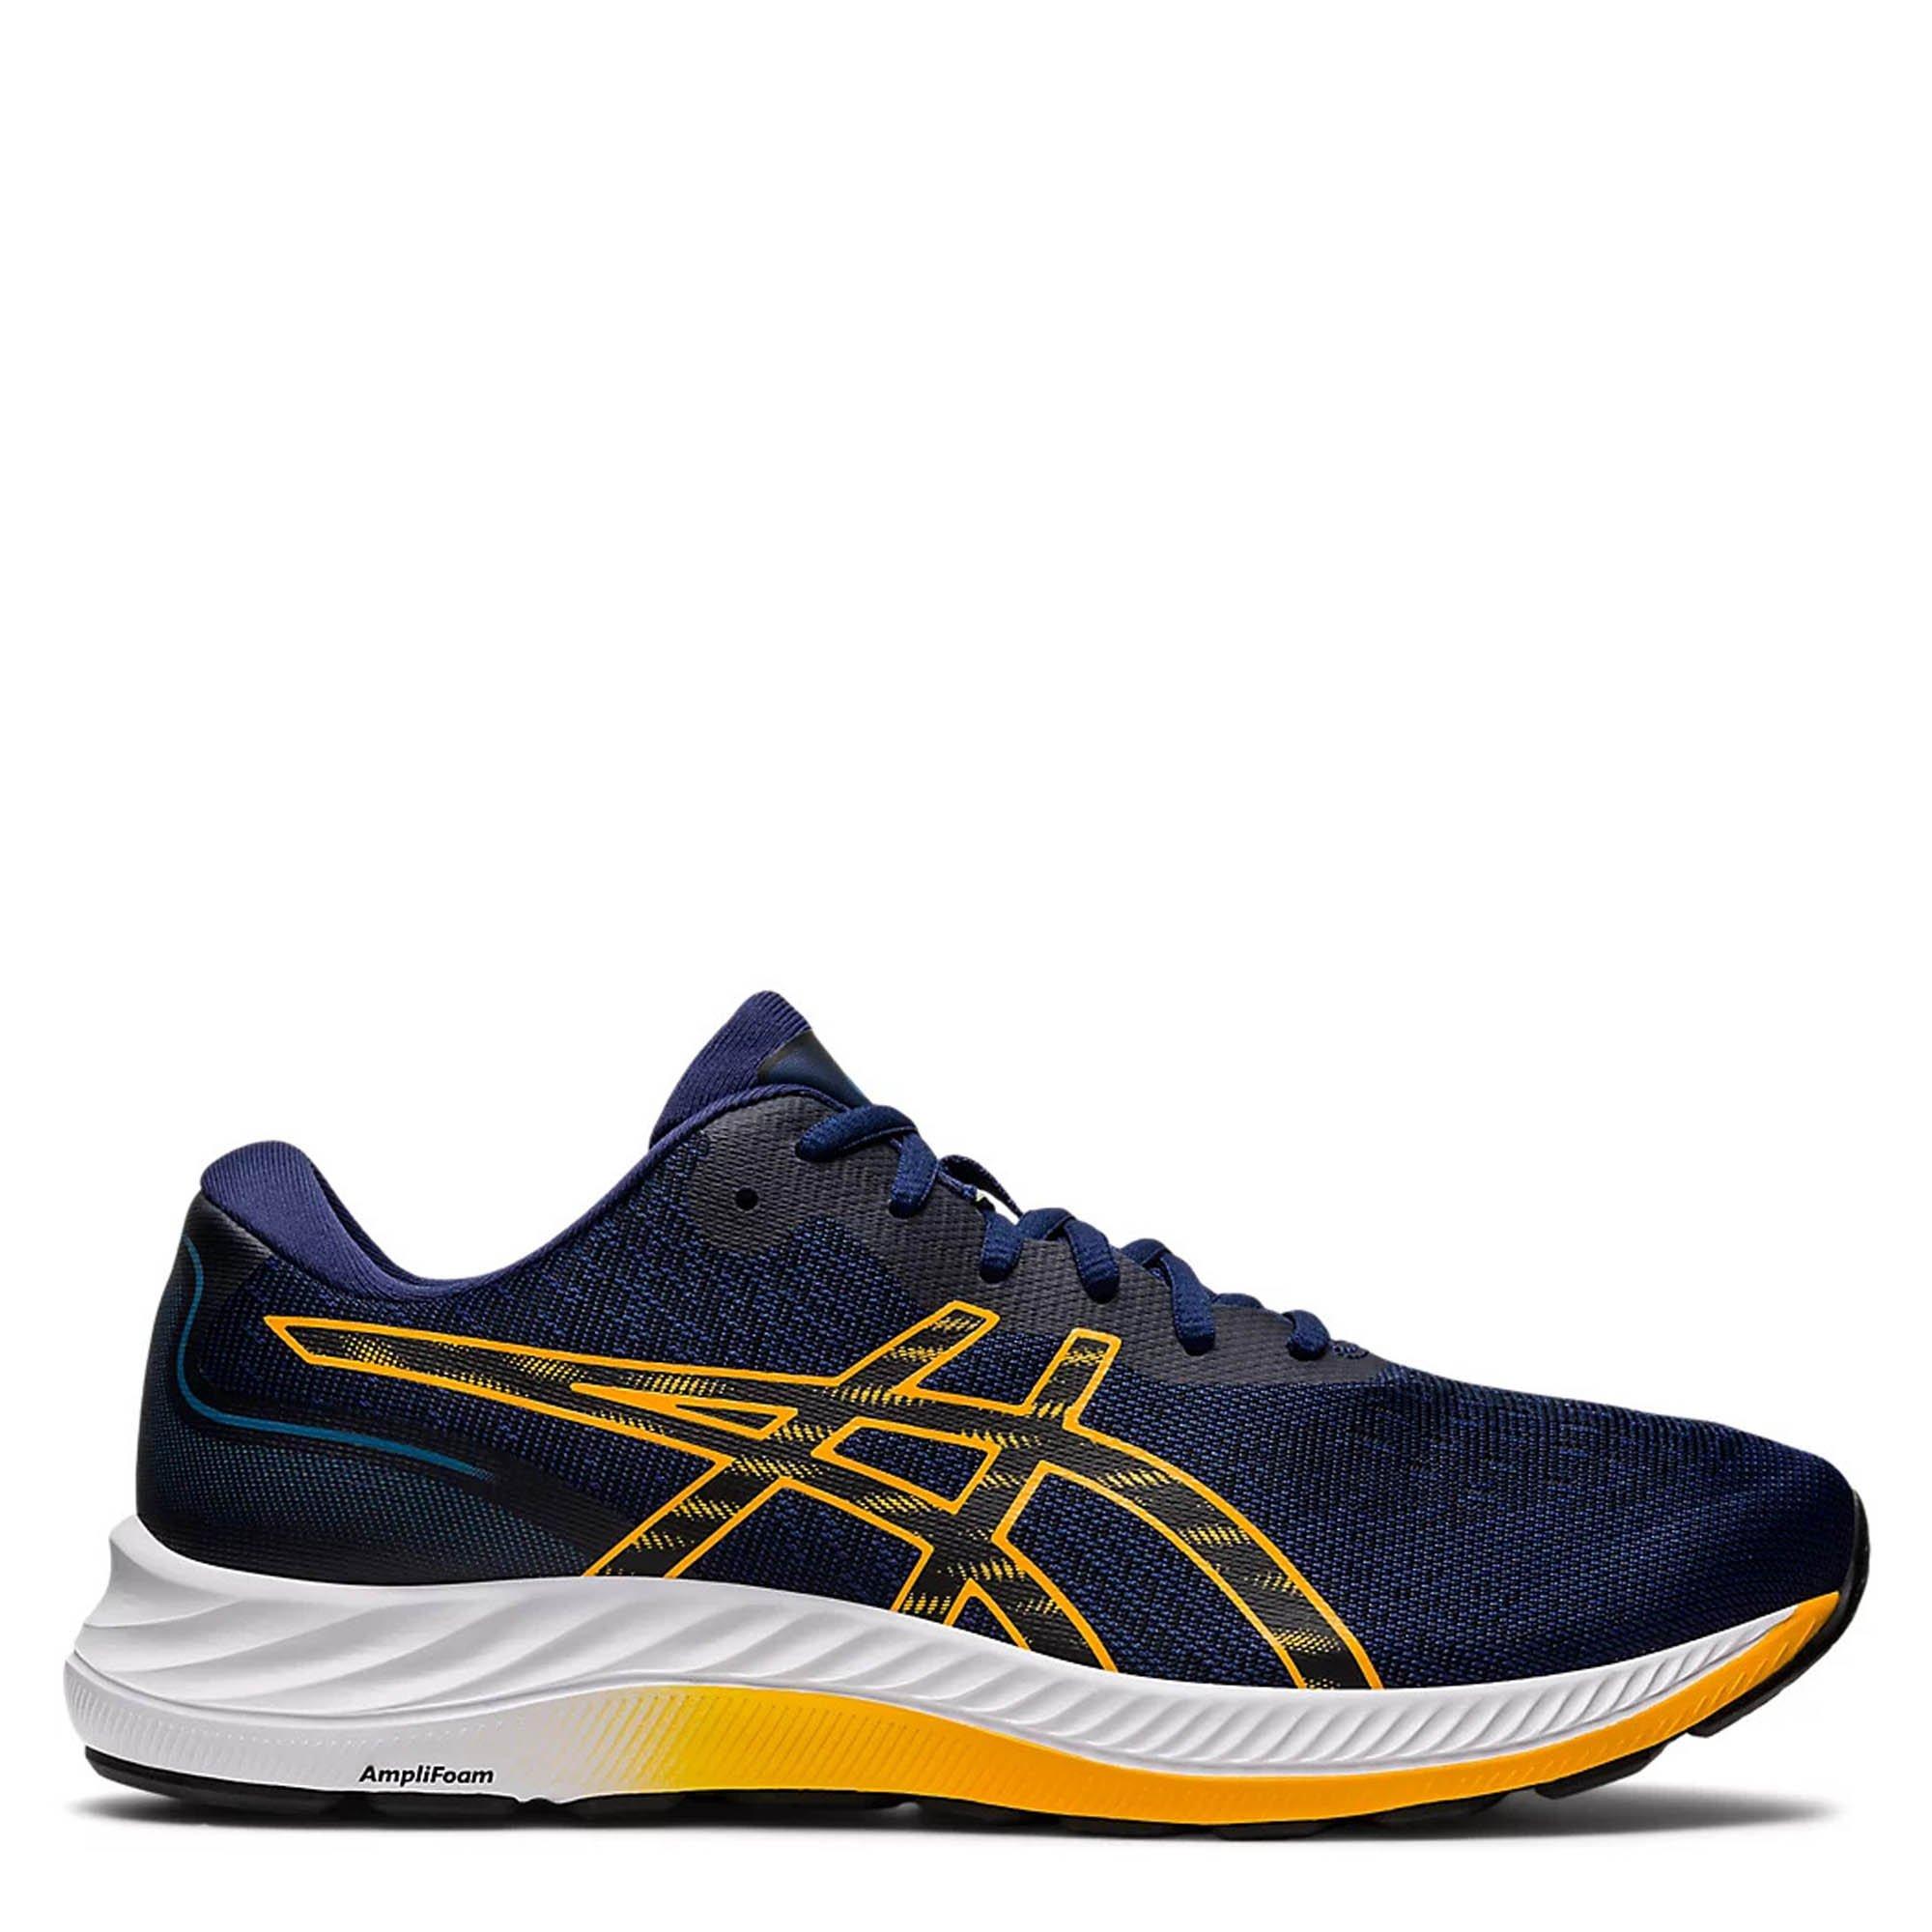 Asics | GEL Excite 9 Running Shoes | Neutral Road Running Shoes | Sports Direct